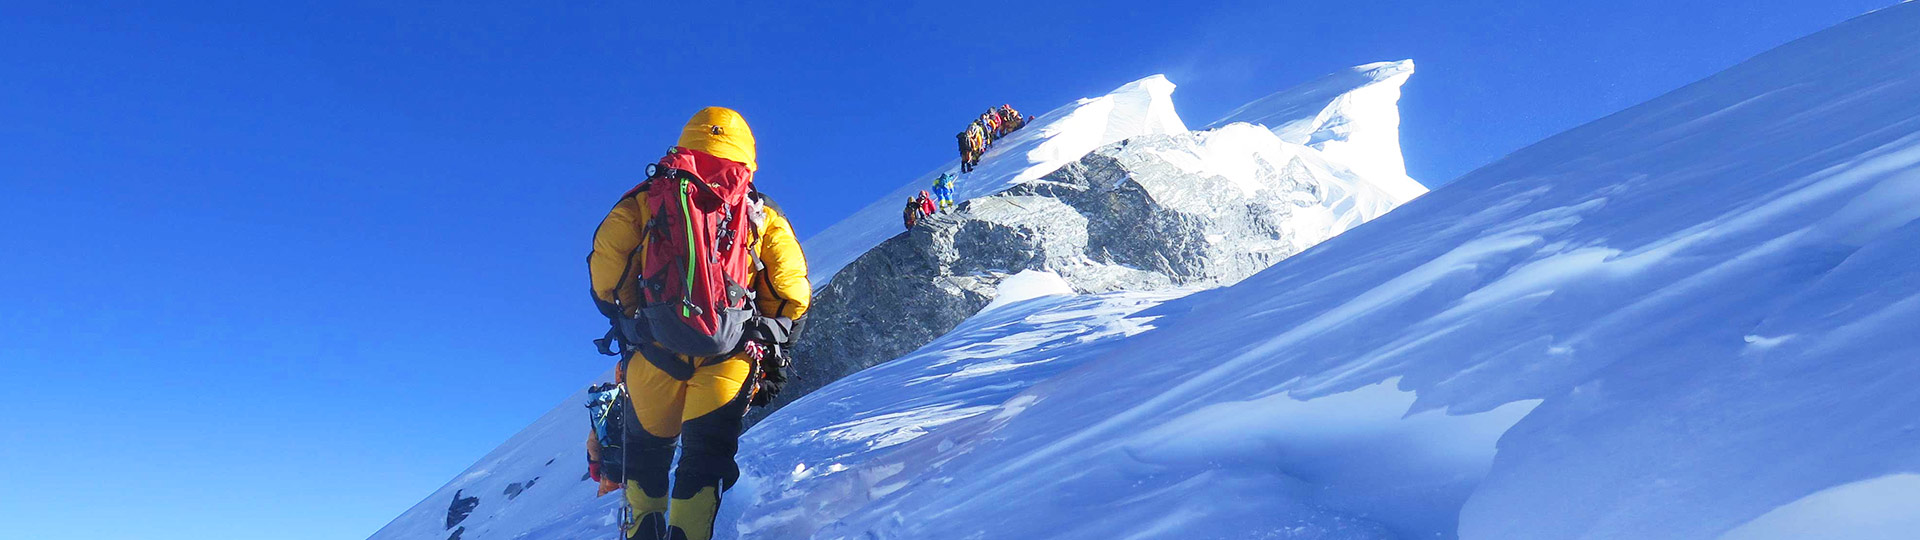 Mount Everest Climbing Expedition in Nepal 